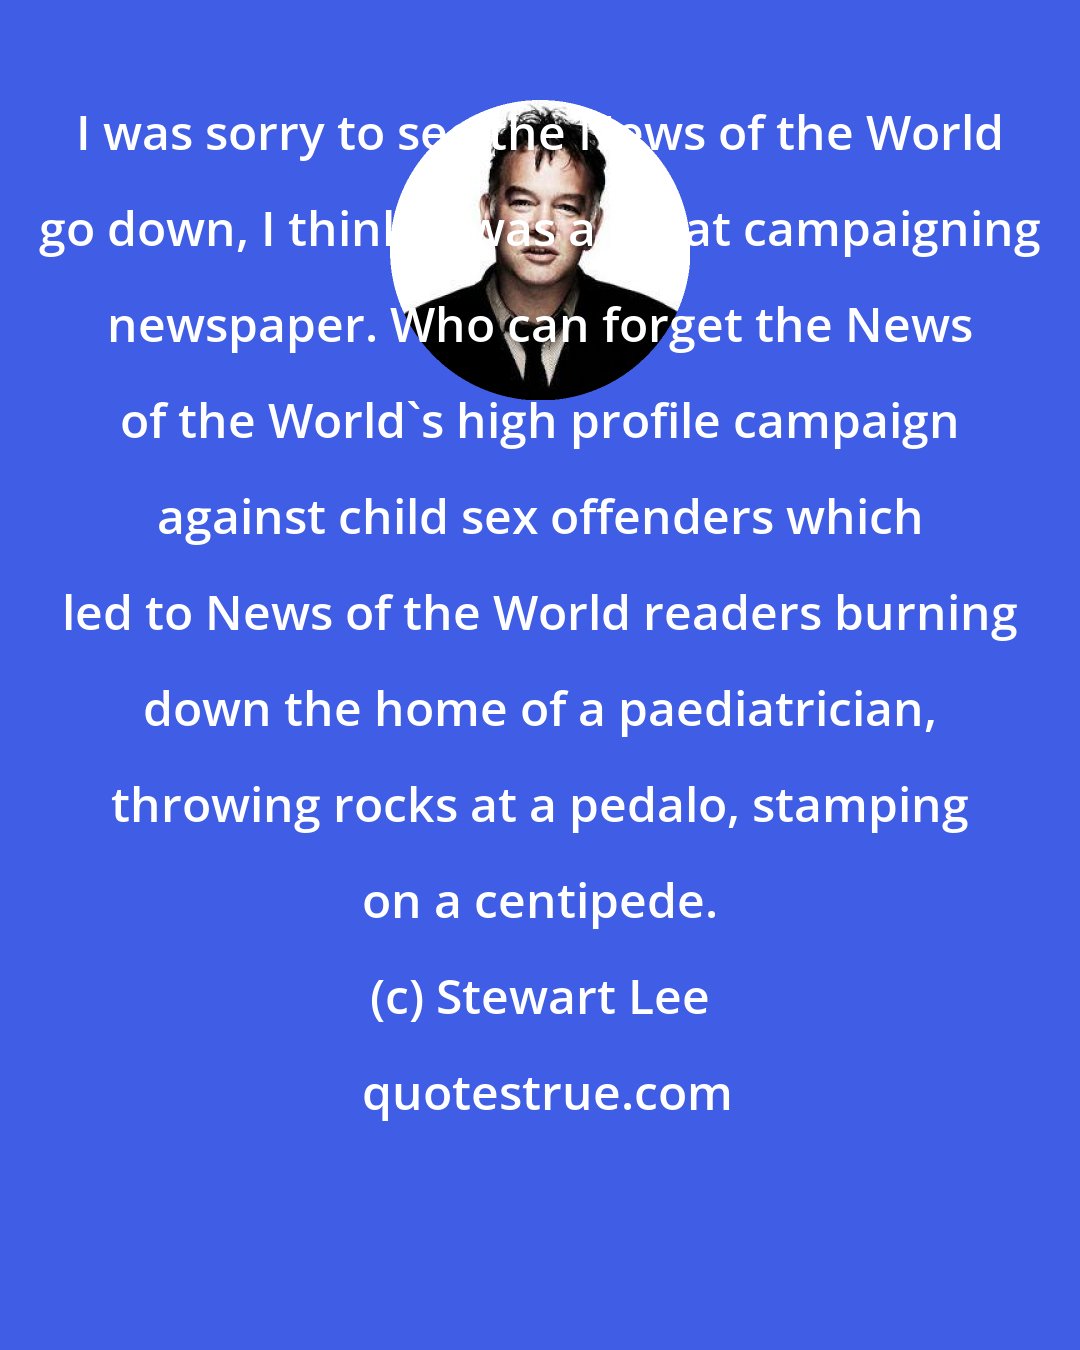 Stewart Lee: I was sorry to see the News of the World go down, I think it was a great campaigning newspaper. Who can forget the News of the World's high profile campaign against child sex offenders which led to News of the World readers burning down the home of a paediatrician, throwing rocks at a pedalo, stamping on a centipede.